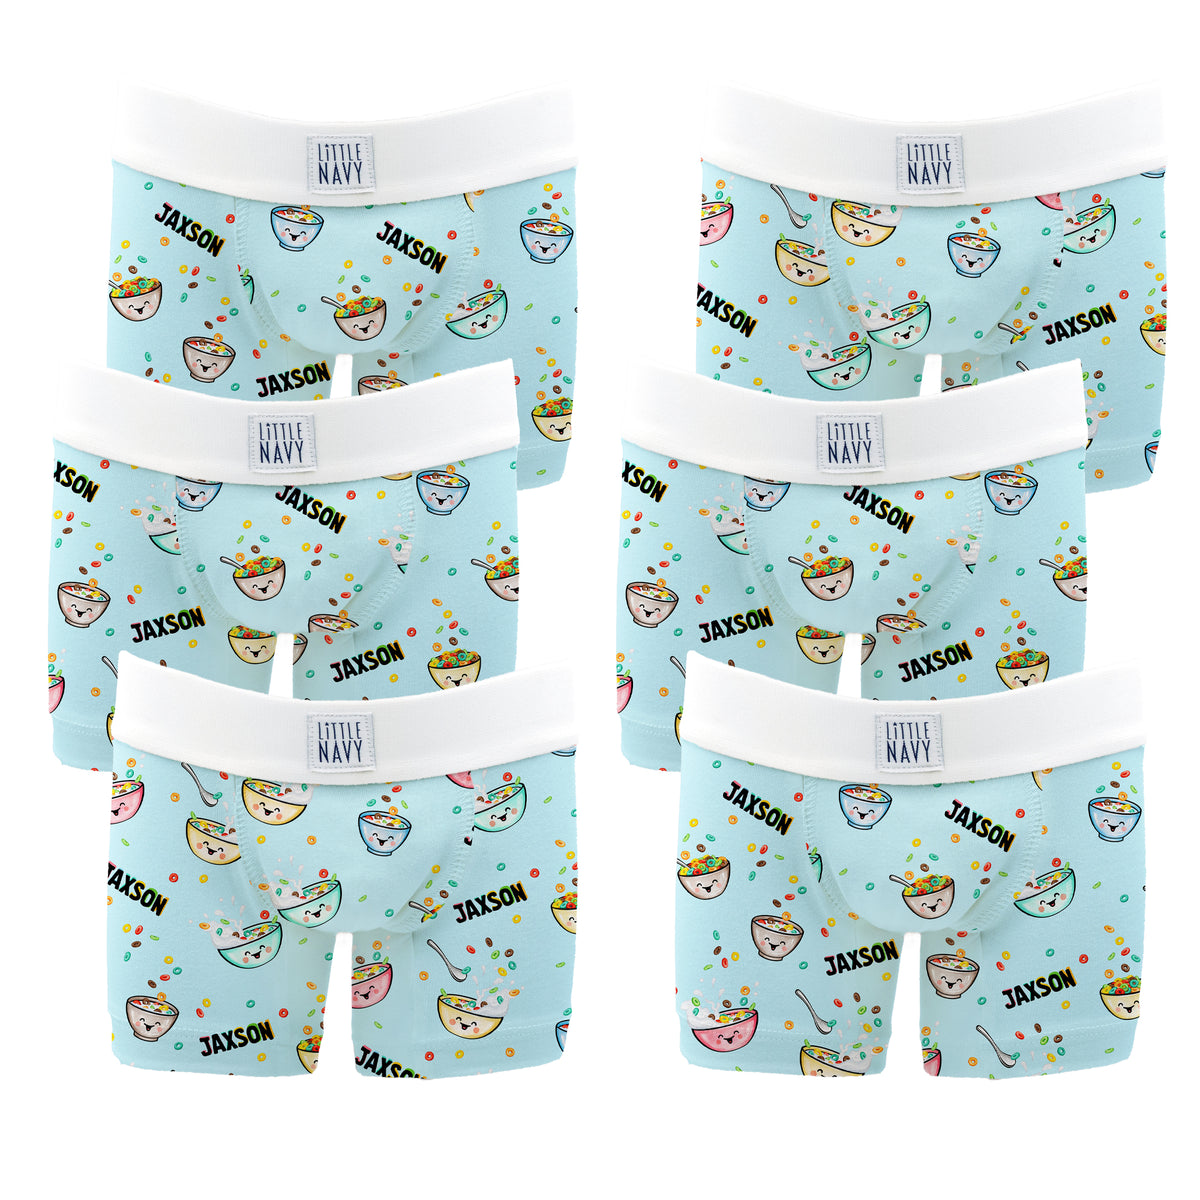 Paw Patrol - Premium Boys Boxer Brief (3 pack) PERSONALIZED - Little Navy